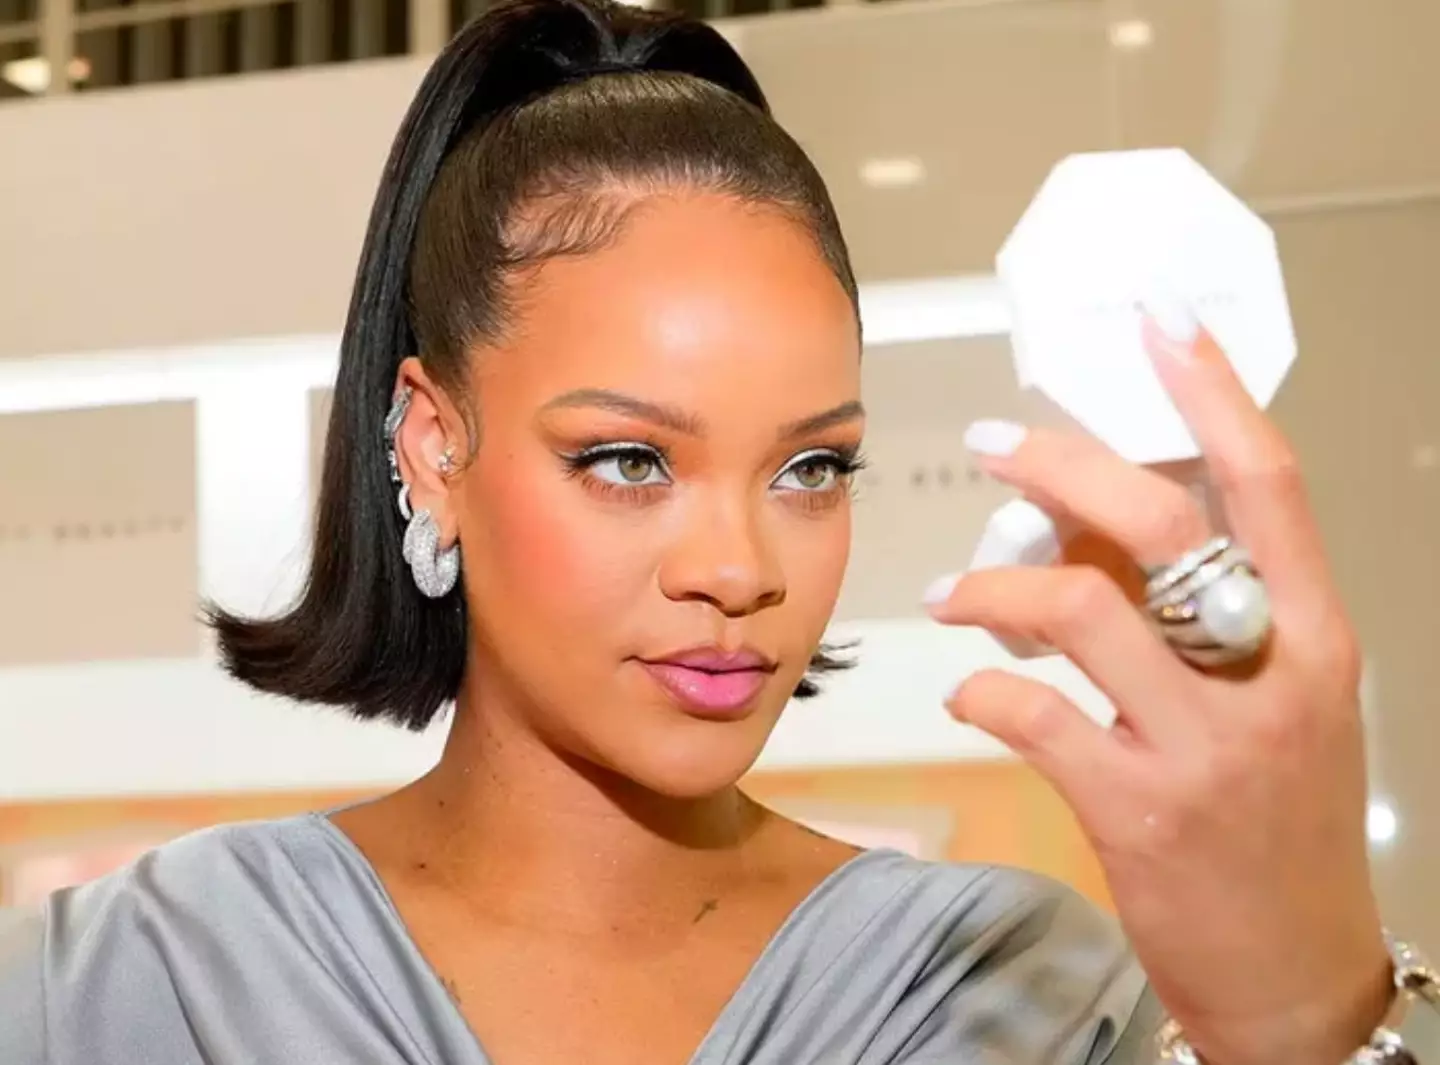 The new and improved hydrating foundation comes from Rihanna's Fenty line.